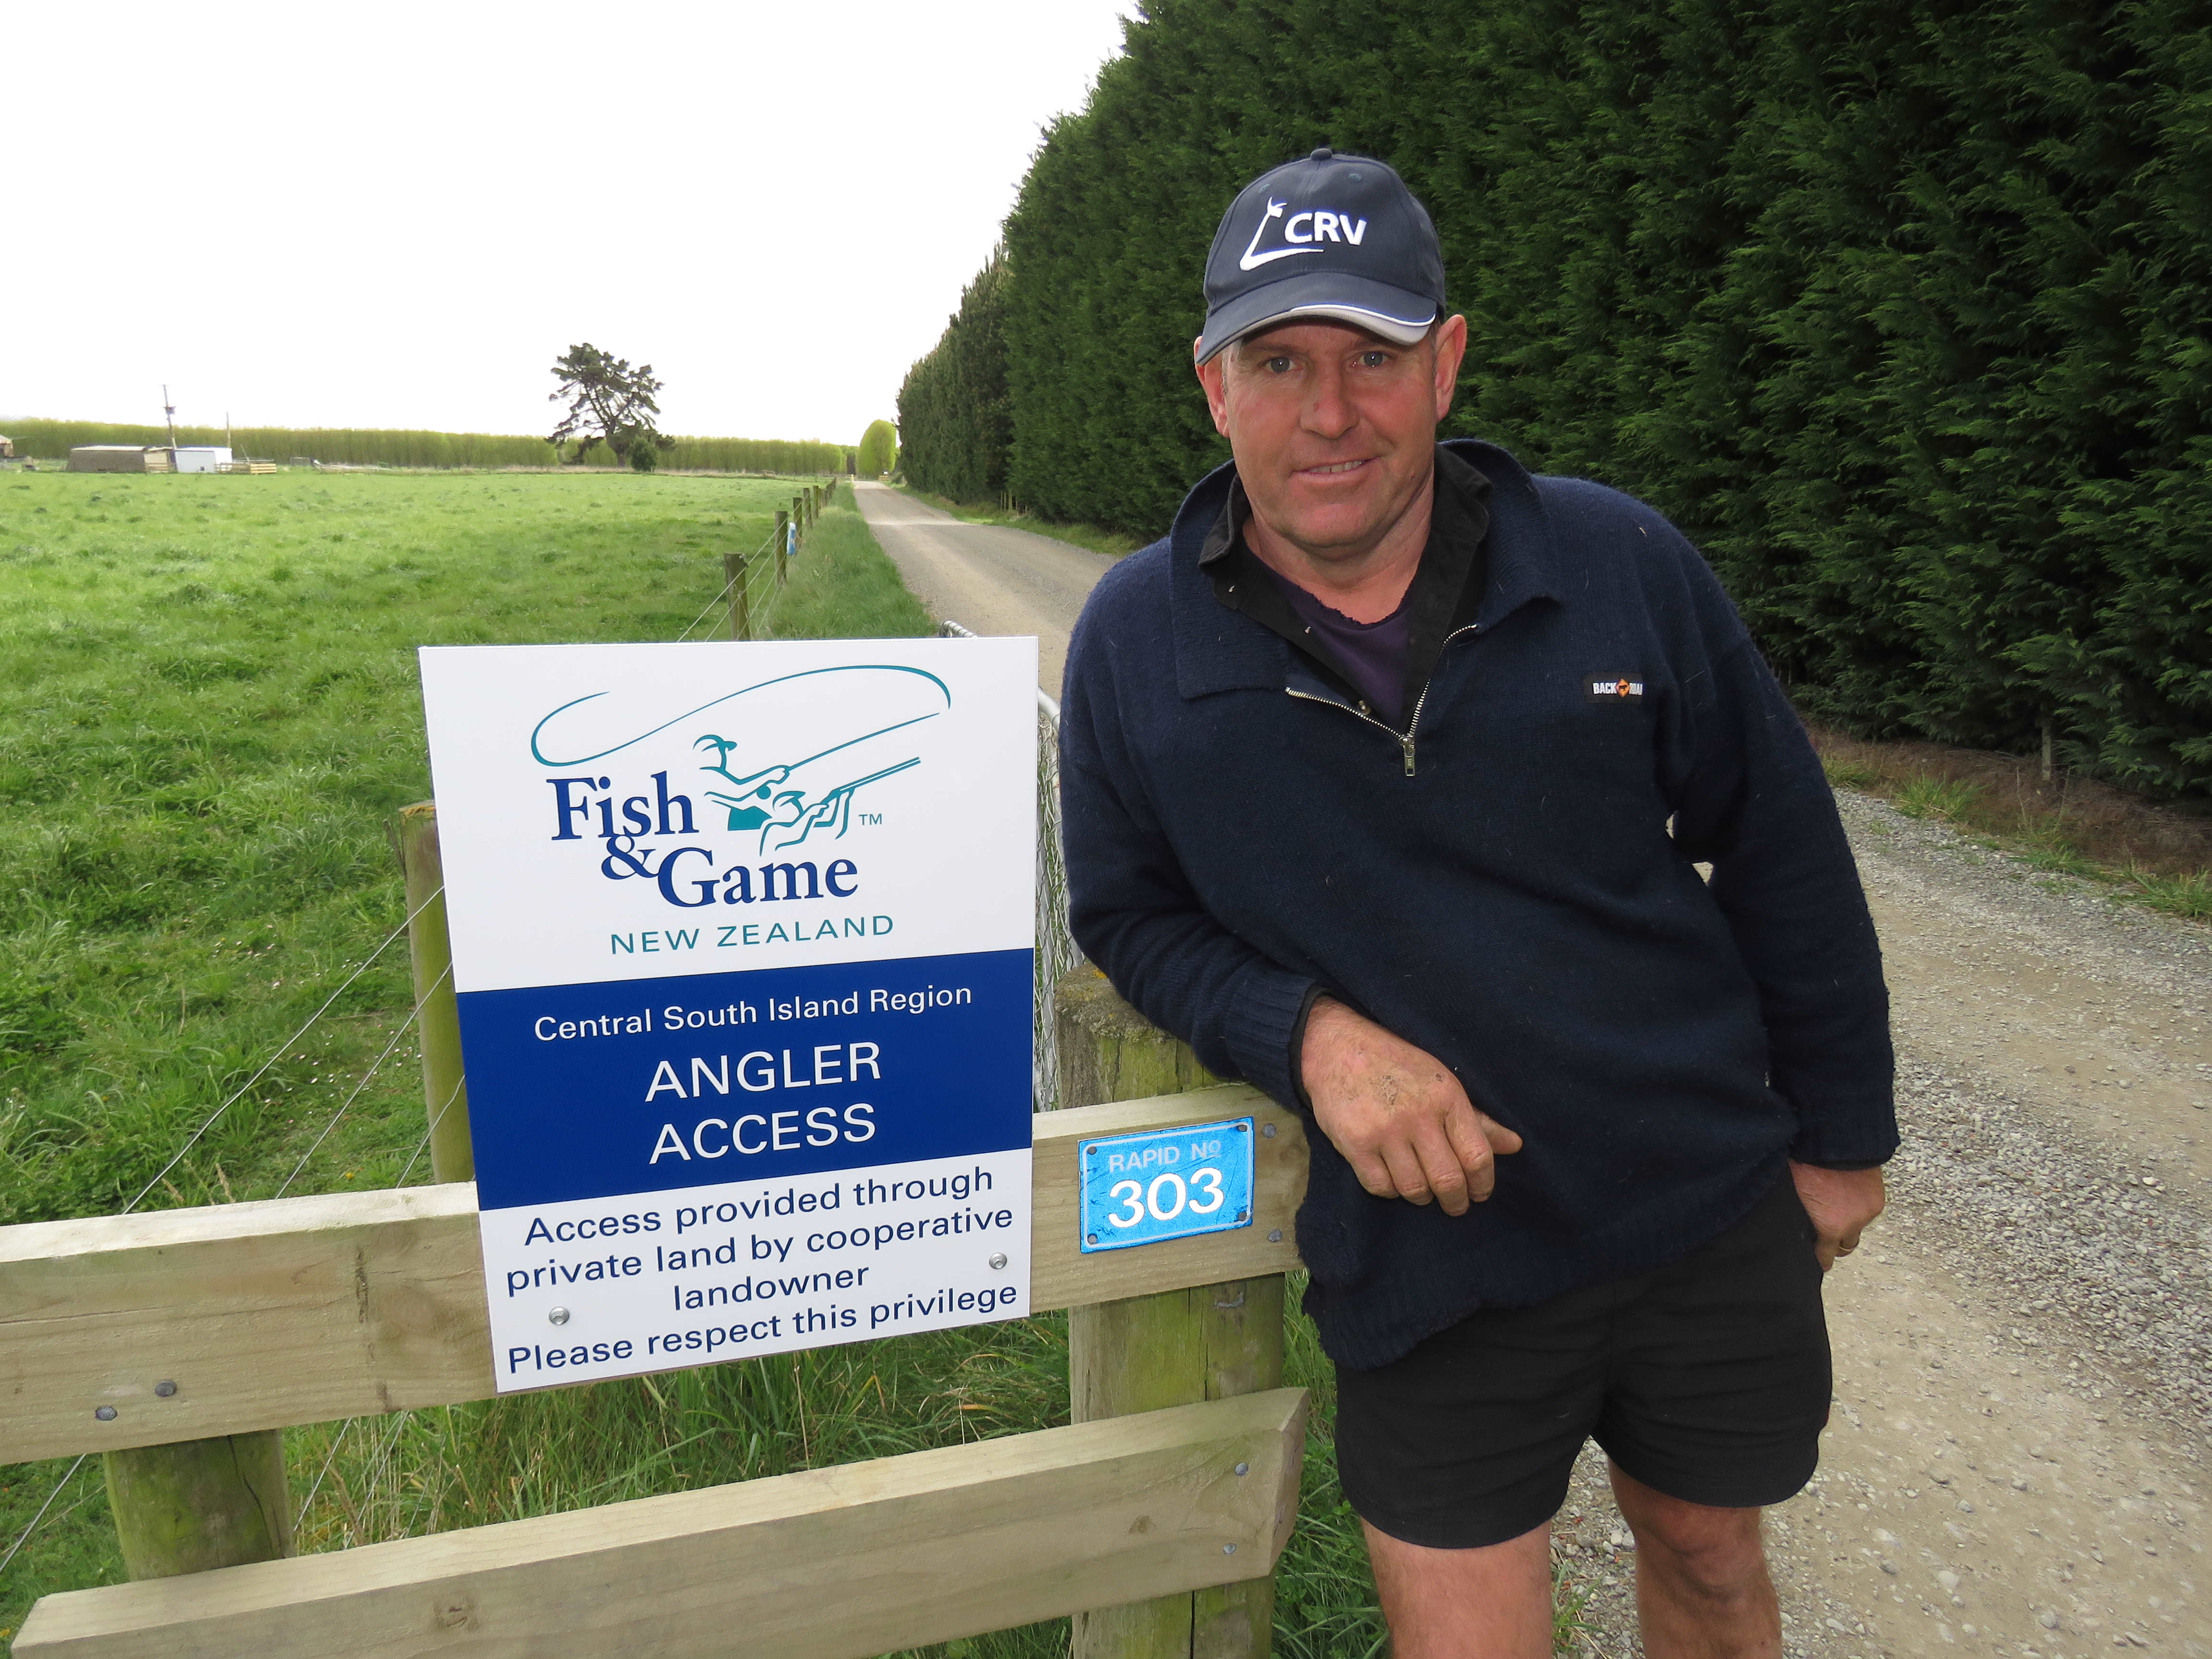 RL OCT CSI 2 Waitaki farmer Geoff Taylor generously provides access to anglers across his private land